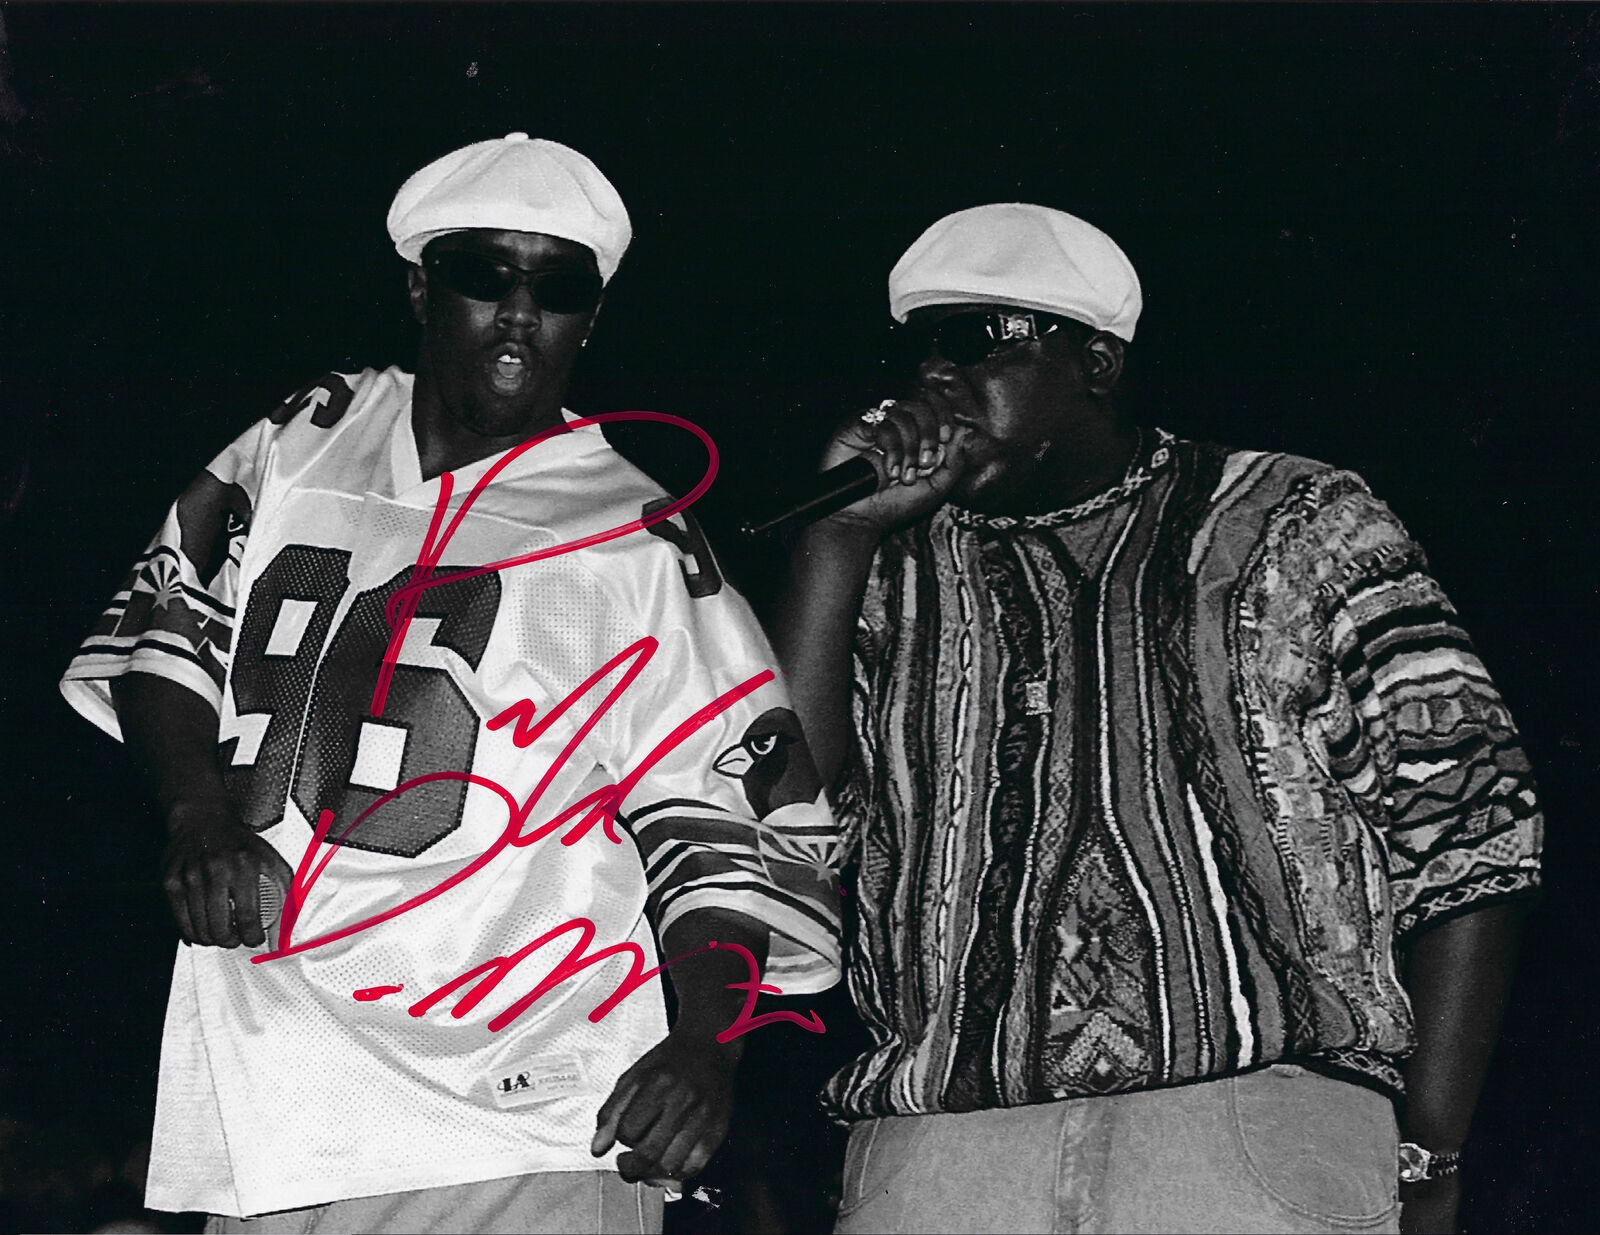 P DIDDY SEAN COMBS SIGNED 14x11 PHOTO BAD BOY NOTORIOUS BIG 4 (AFTAL COA)